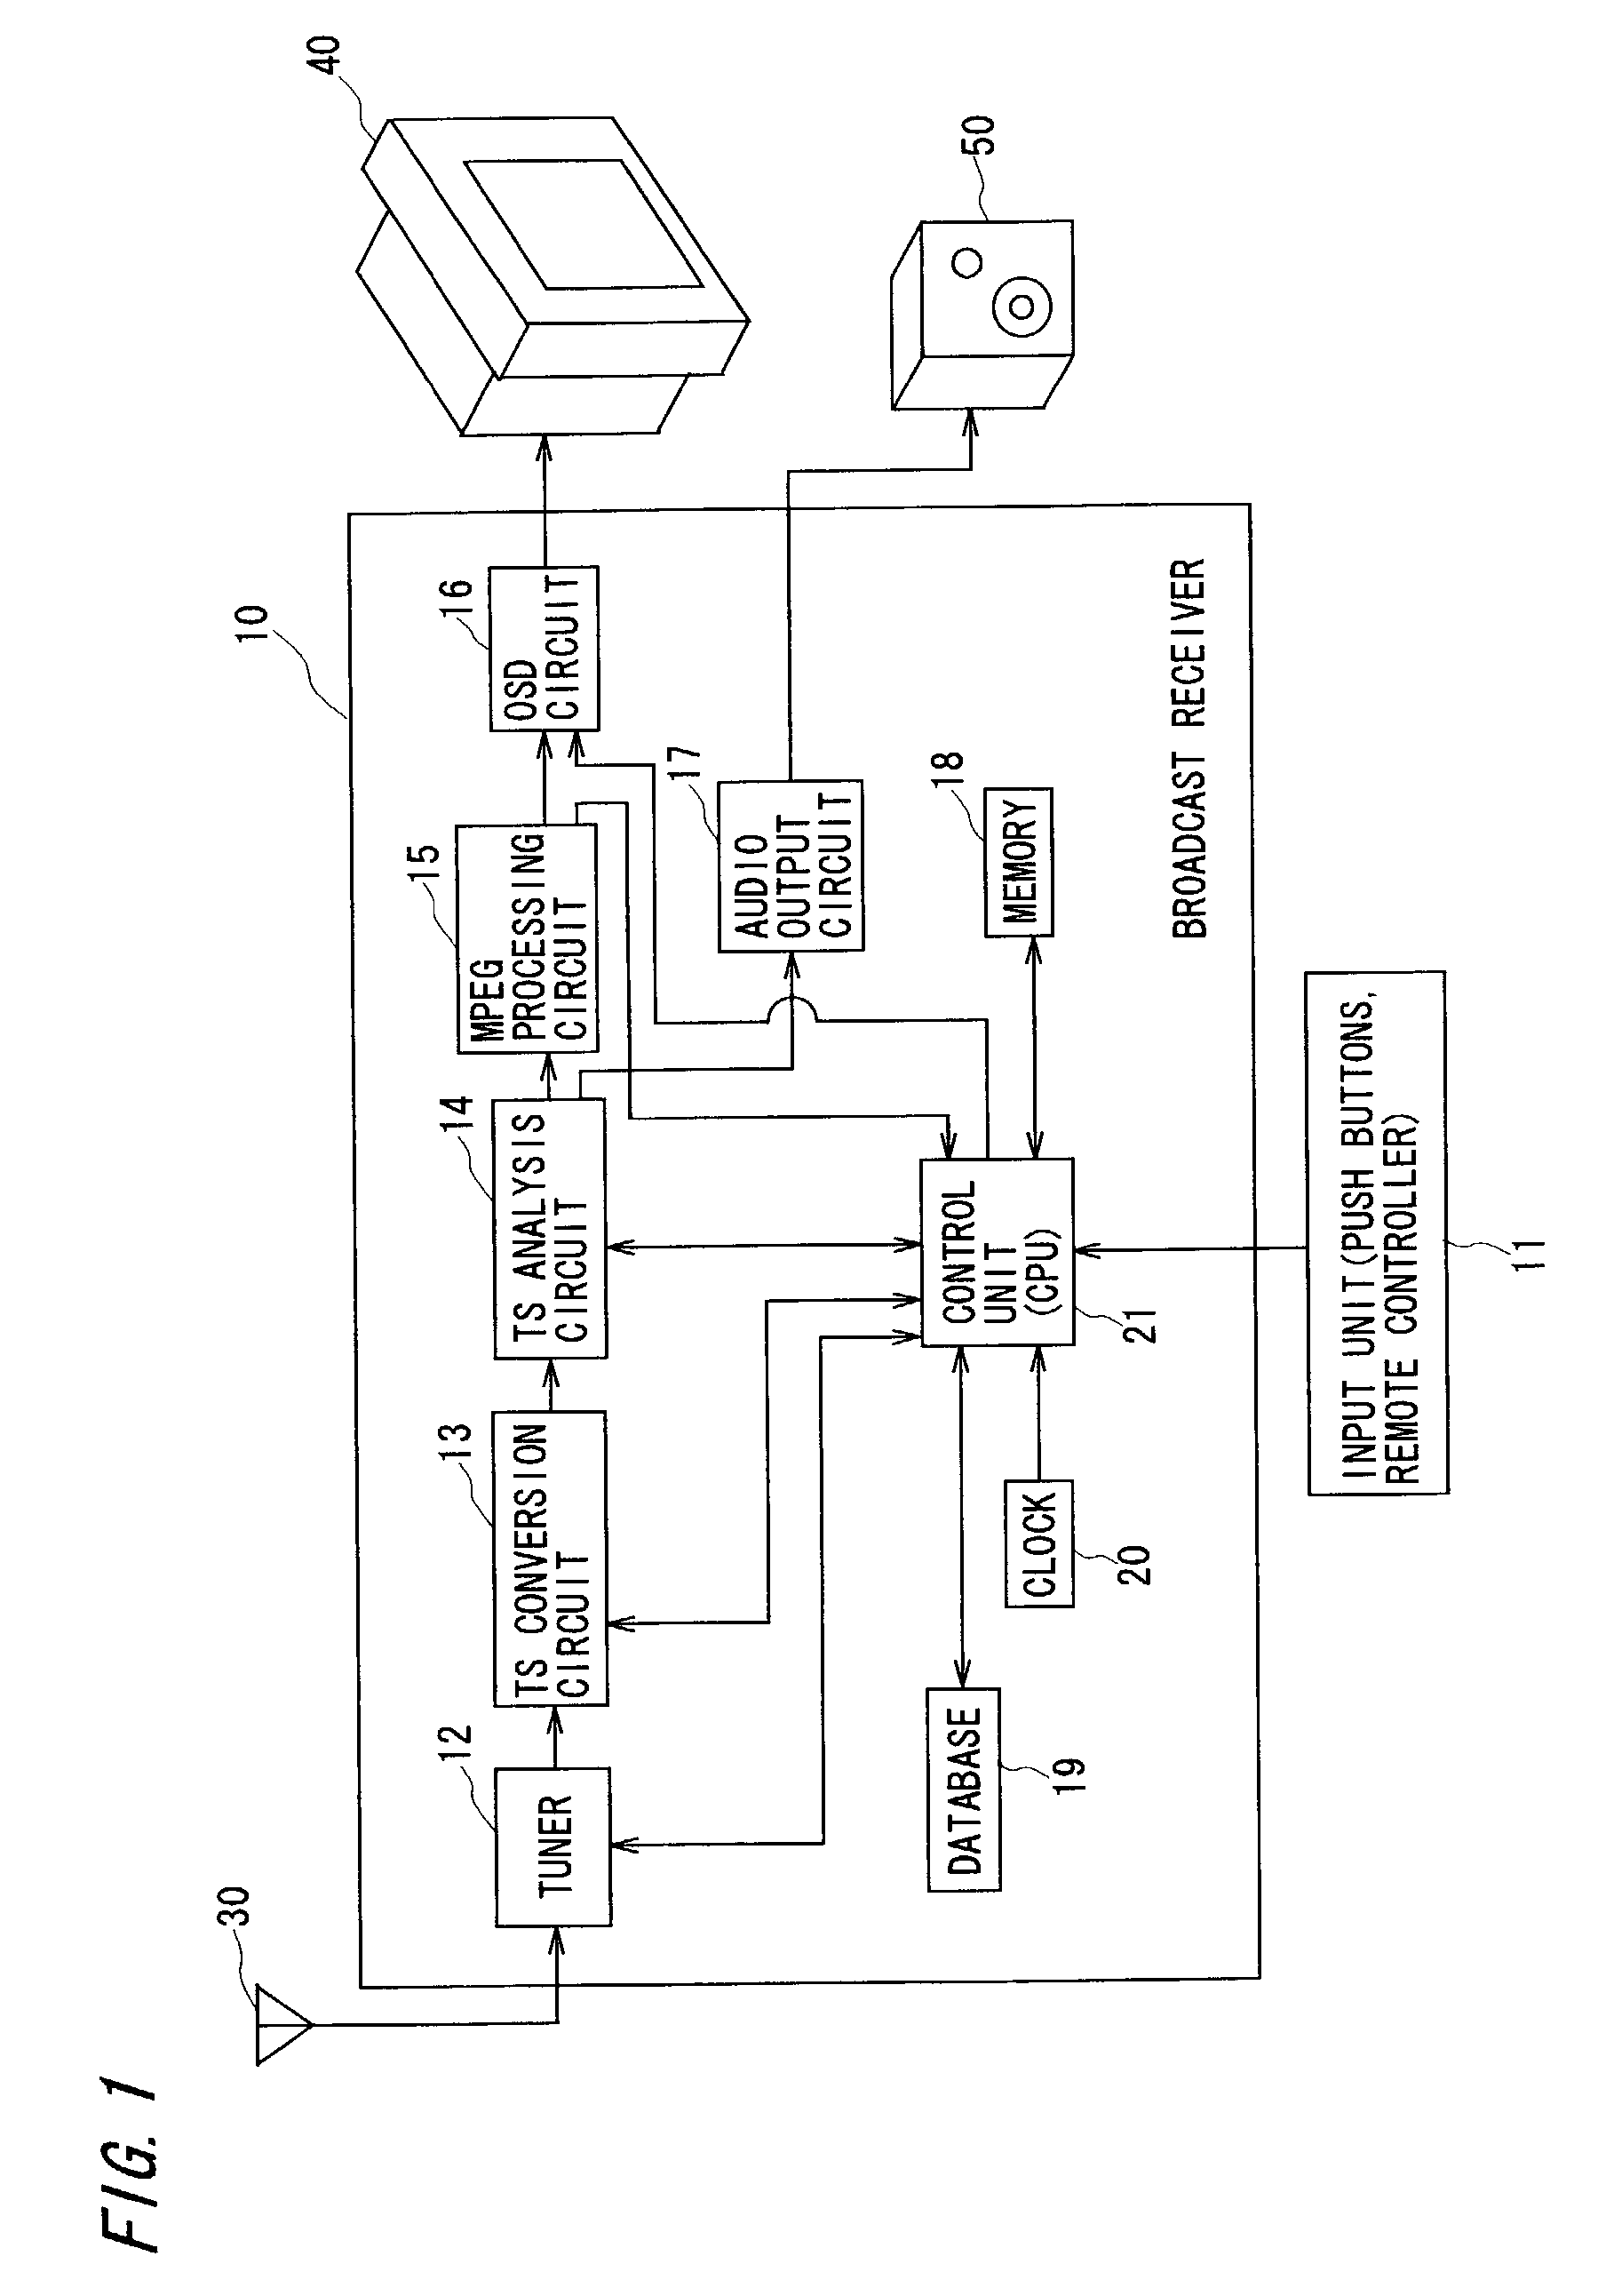 Broadcast receiver having a function of displaying previously stored image during channel selection